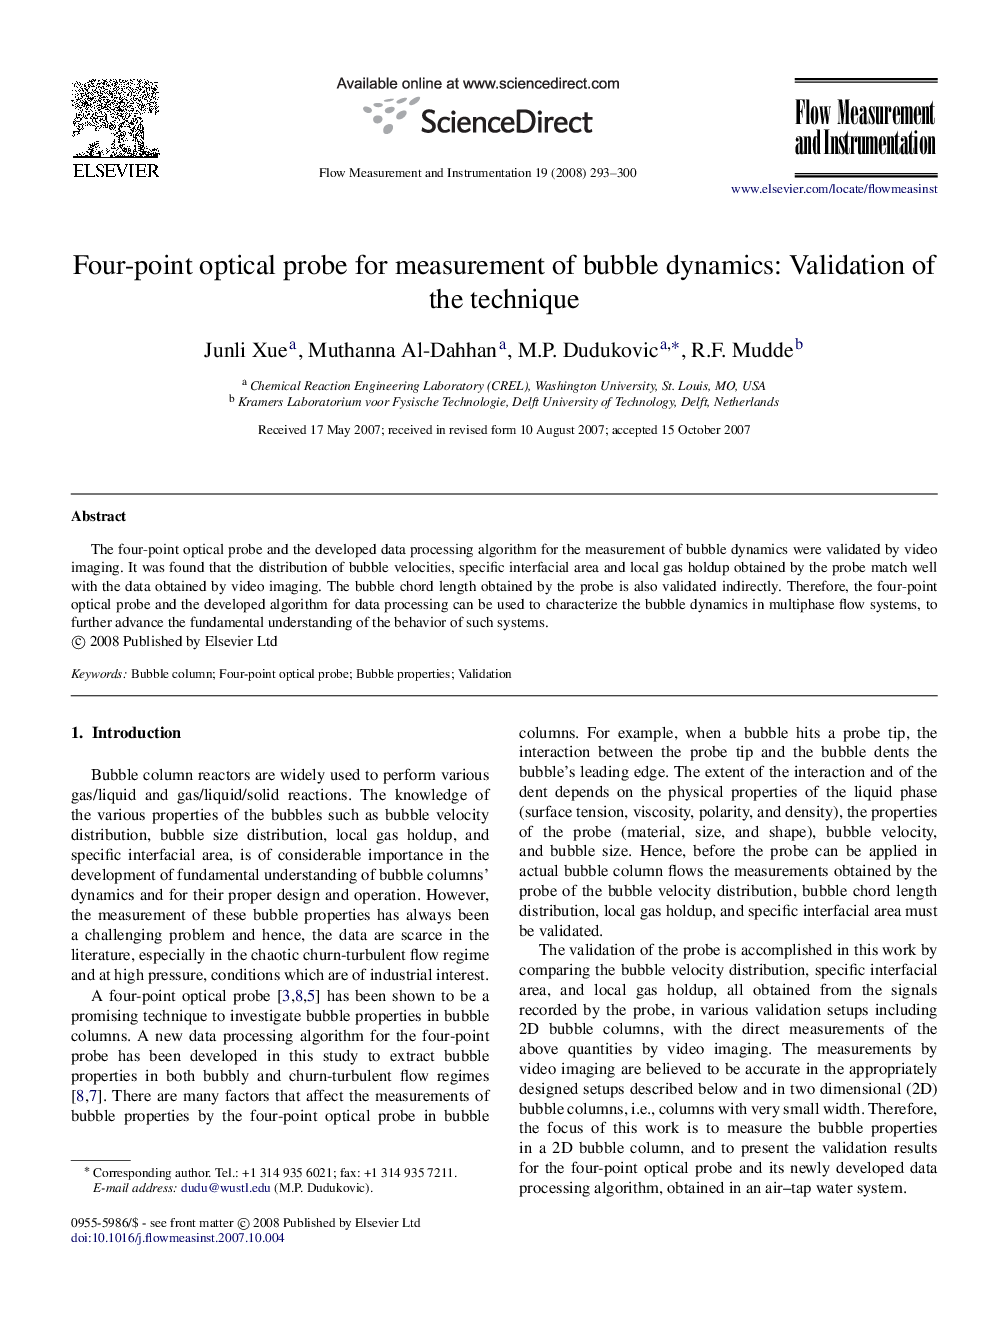 Four-point optical probe for measurement of bubble dynamics: Validation of the technique